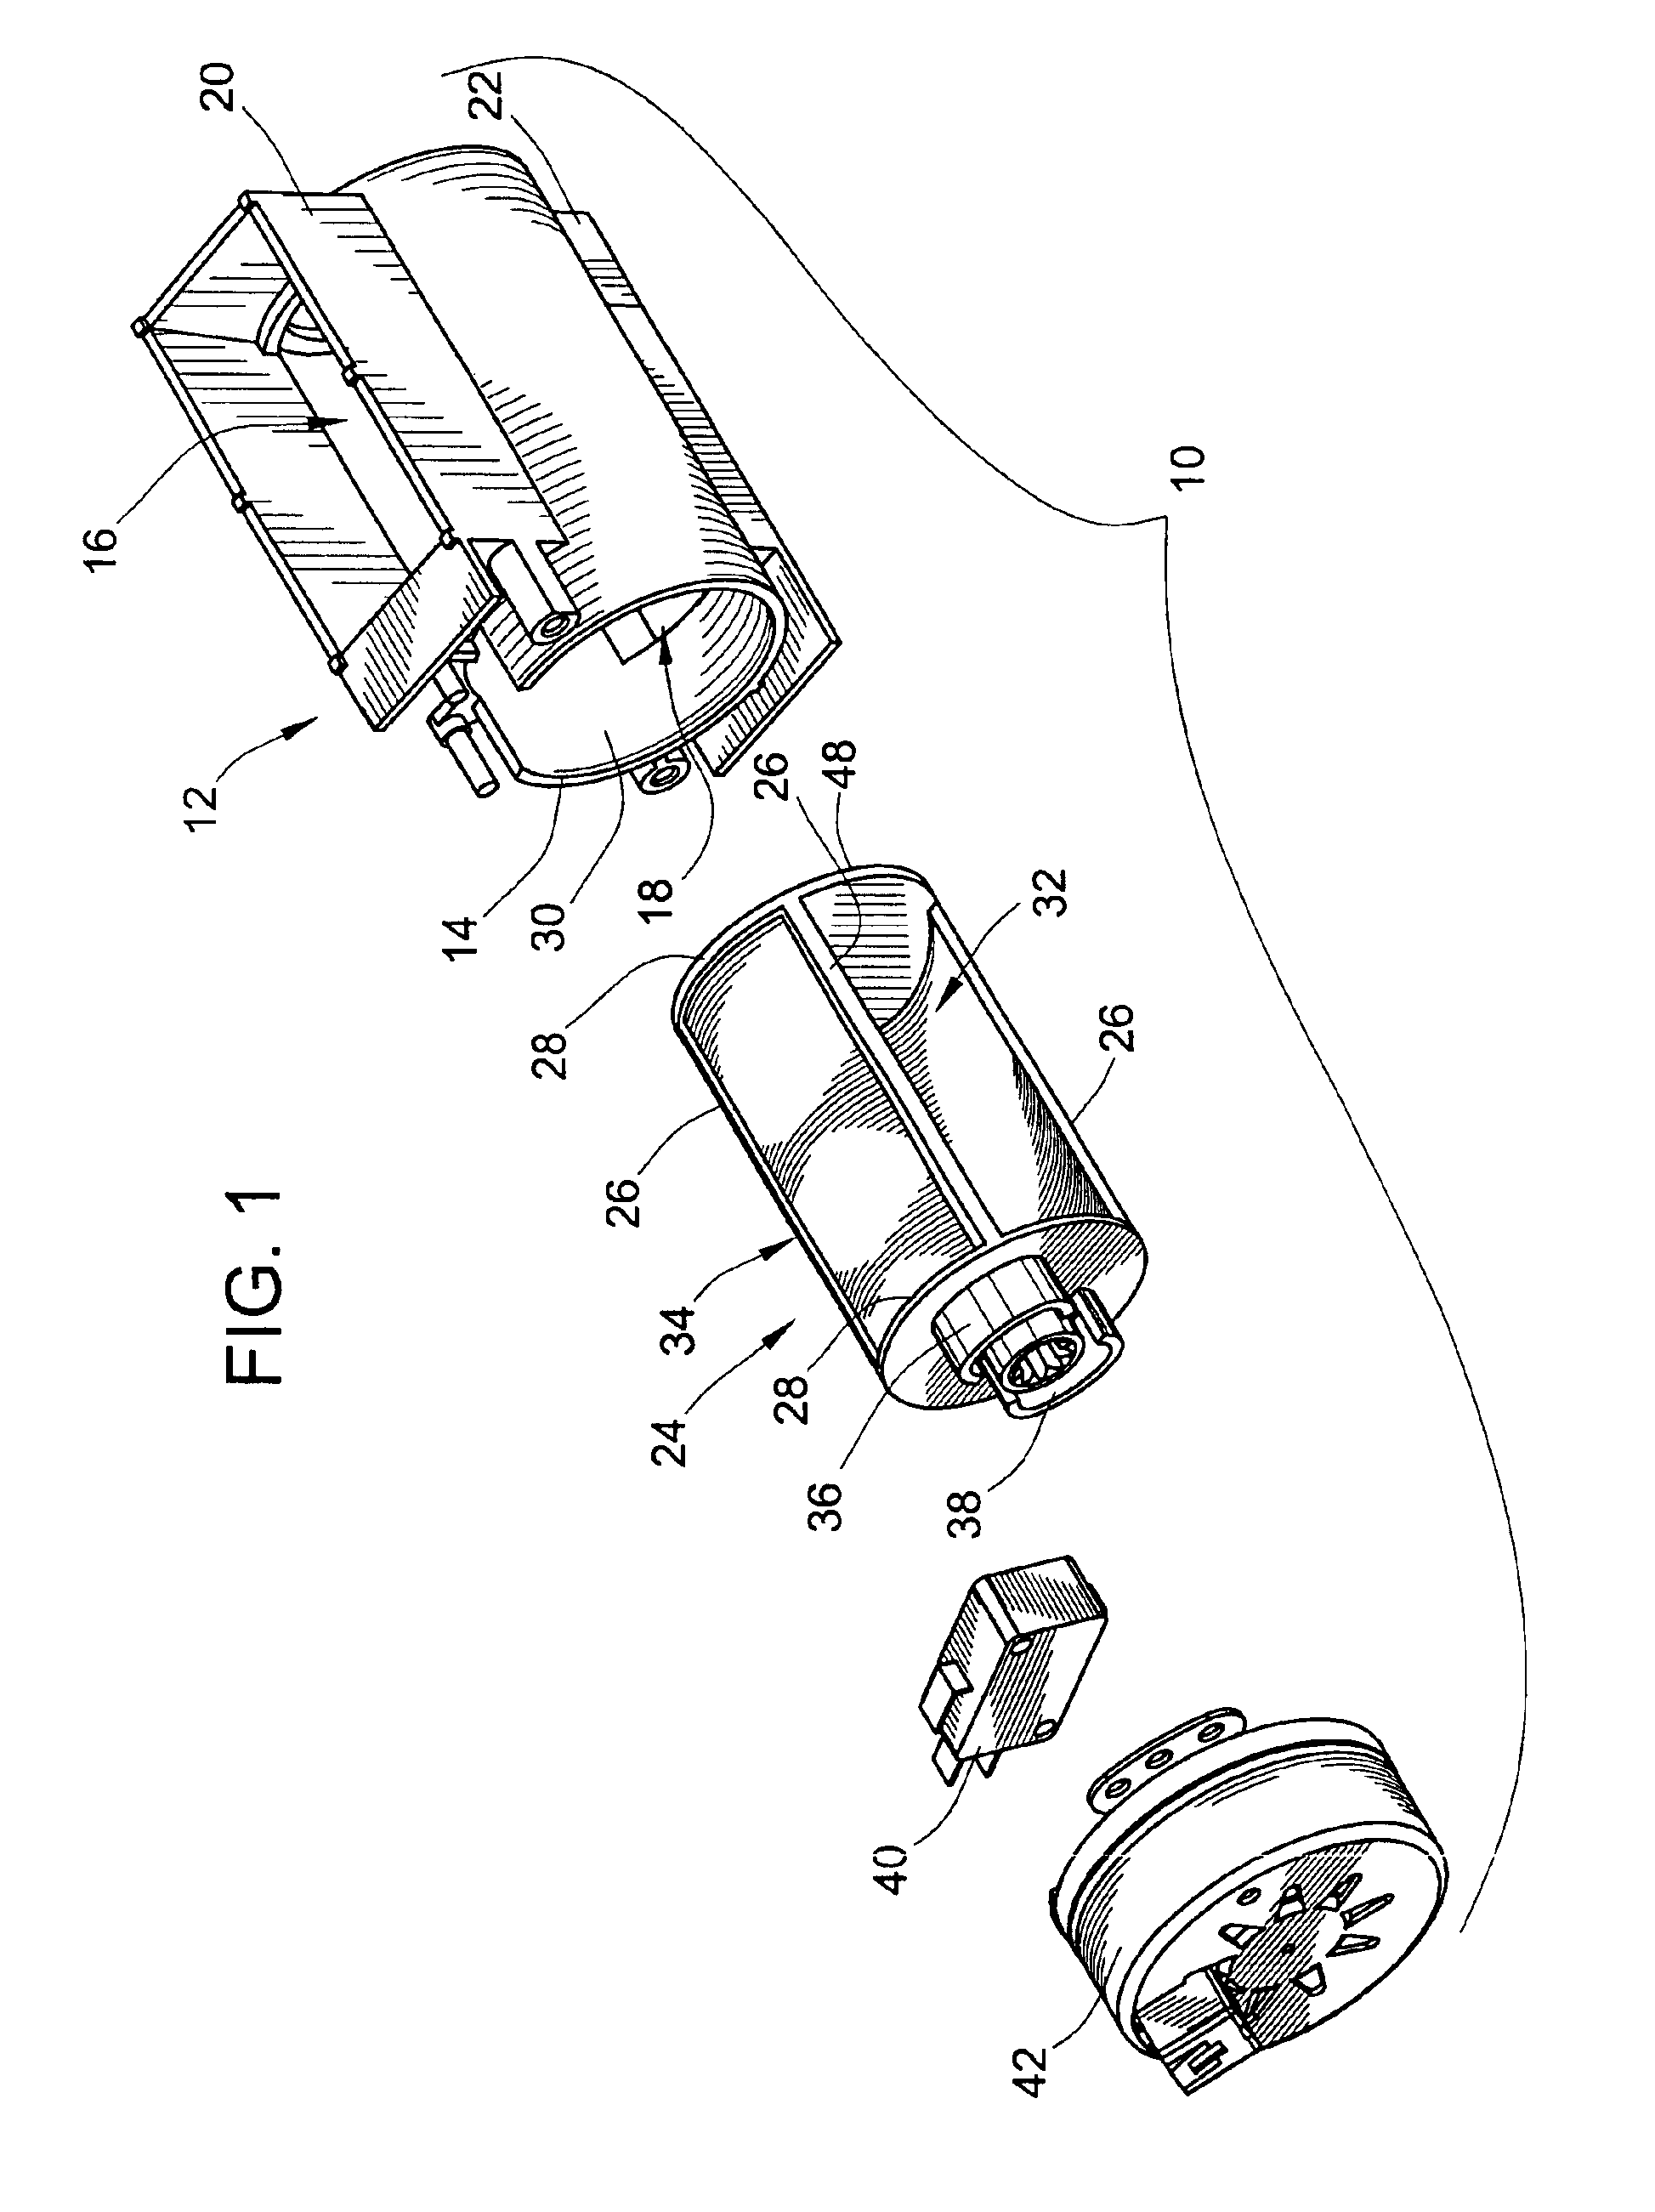 Flow-through rotary damper providing compartment selectivity for a multi-compartment refrigerator